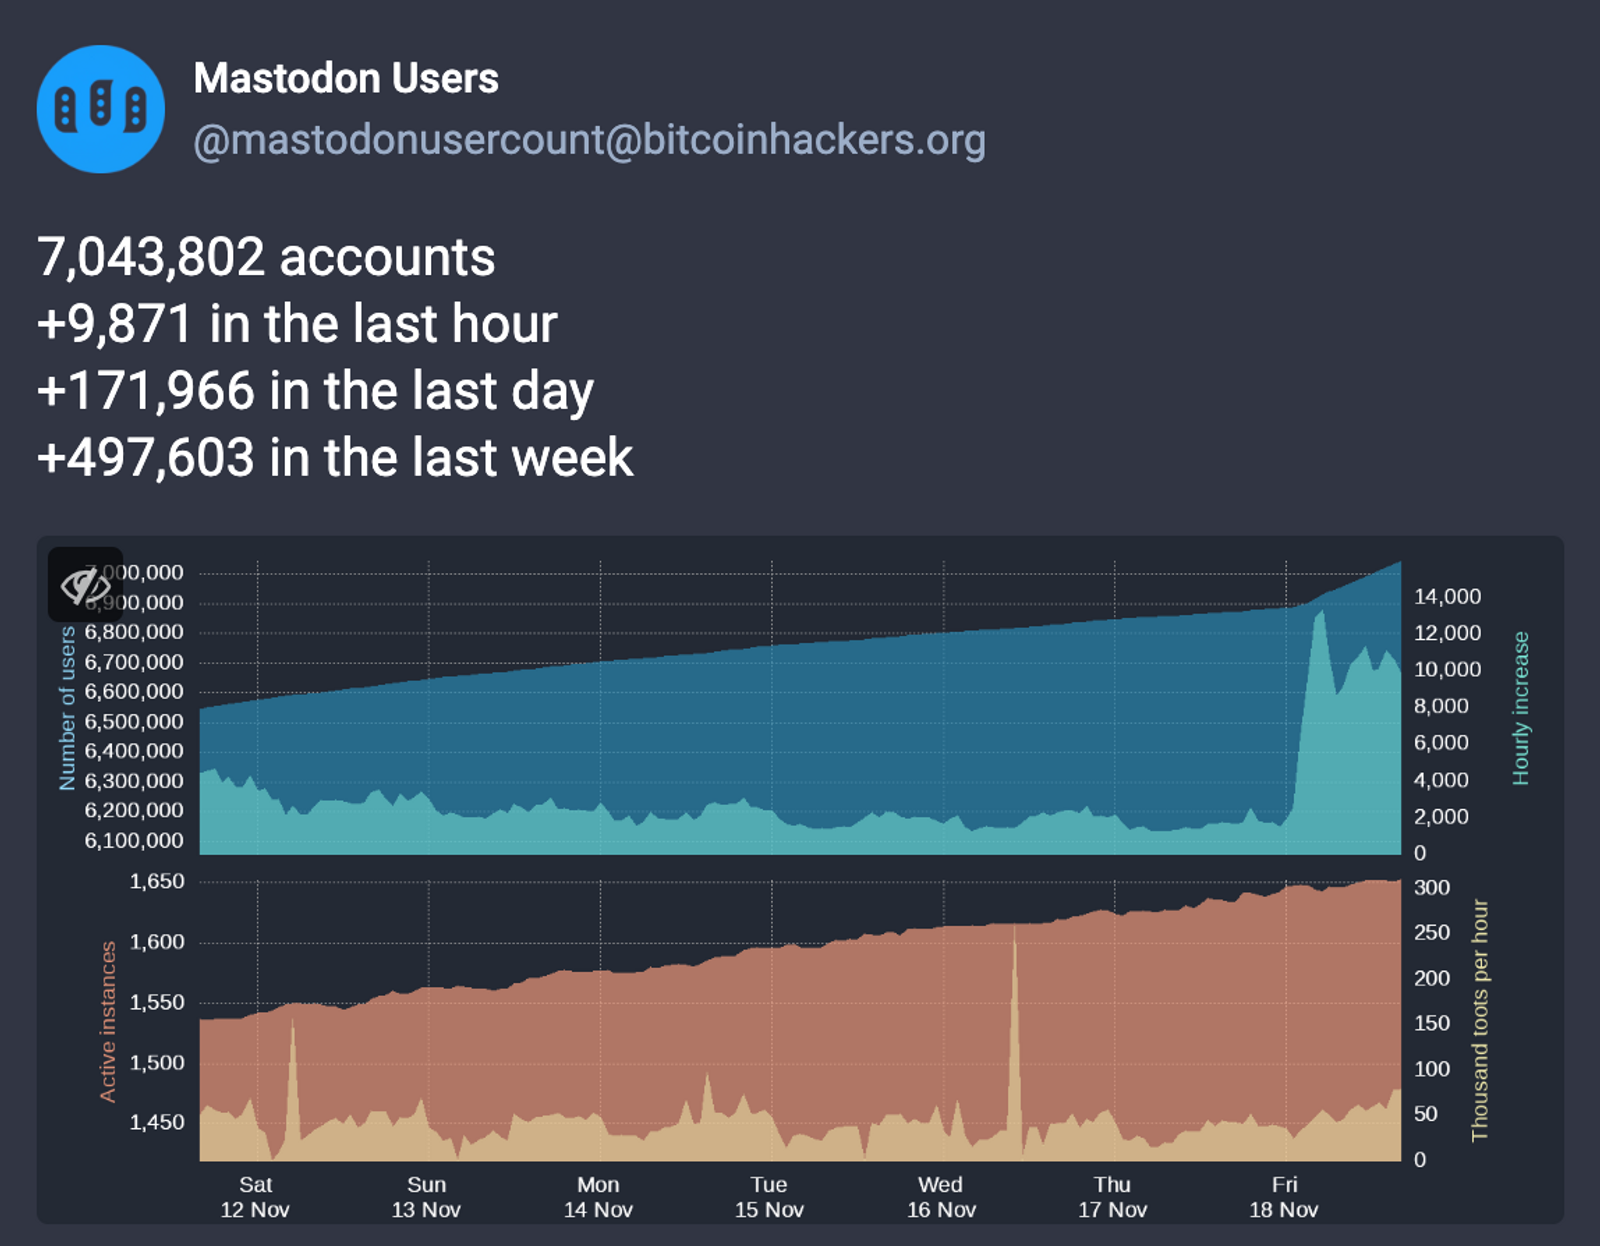 A screenshot of the @mastodonusercount account showing the spike in new users in the last 24 hours